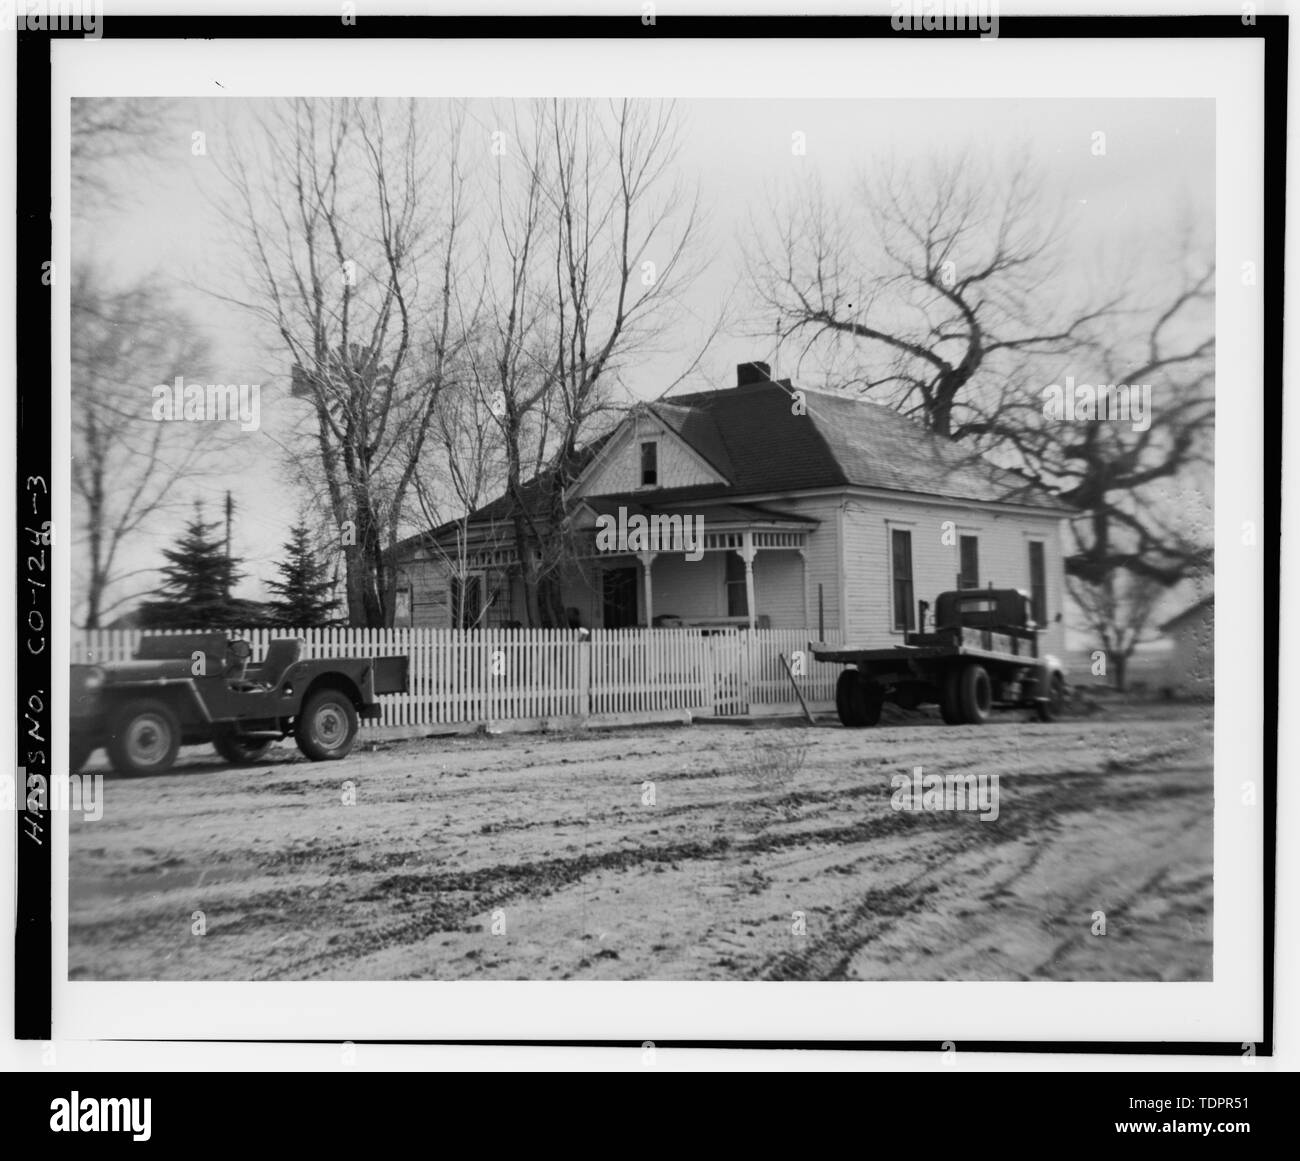 Photographic copy of photograph (ca. 1955, original negative found in Beierle Barn, now on file at New Denver International Airport Office, Stapleton International Ariport, Denver, CO). VIEW OF RESIDENCE AND FARM, LOOKING NORTHEAST. - Beierle Farm, Hudson Road and Ninety-Sixth Avenue, Denver, Denver County, CO Stock Photo